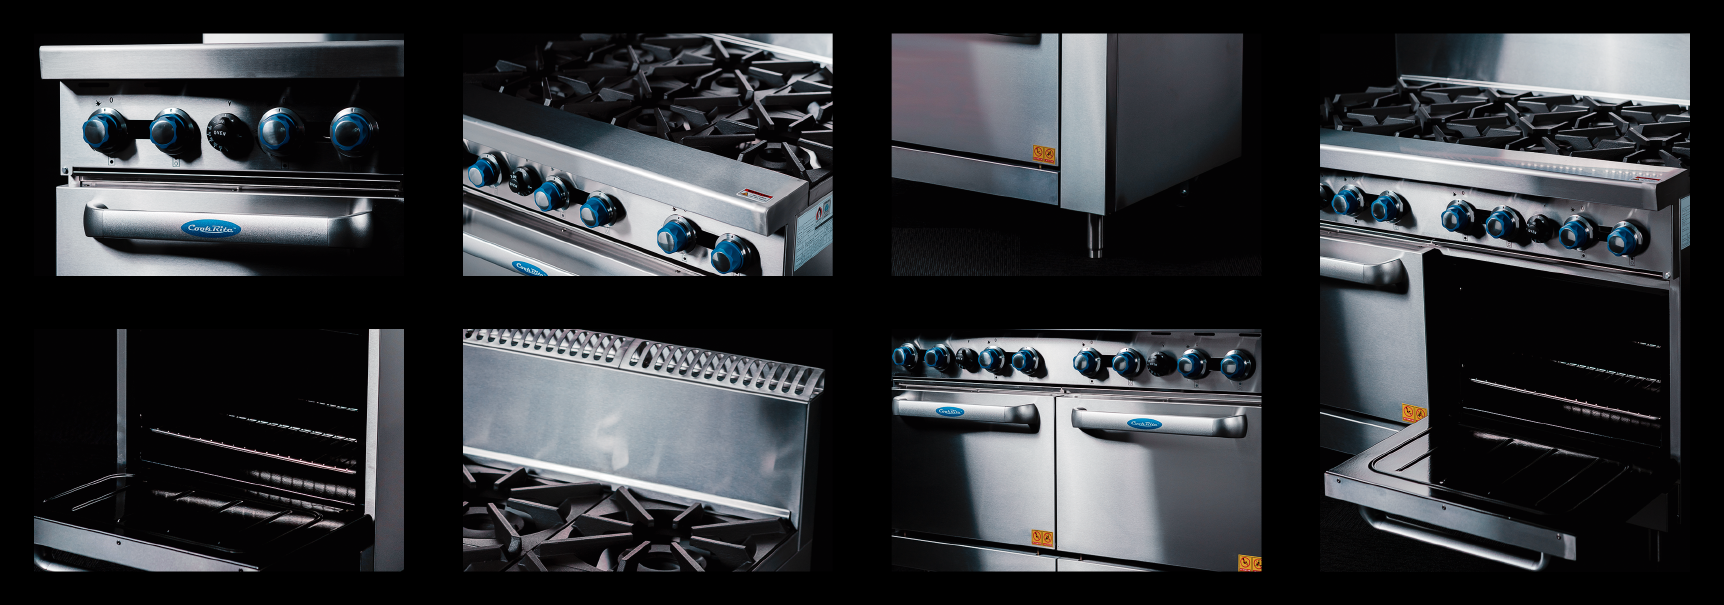 Commercial oven closeup pictures